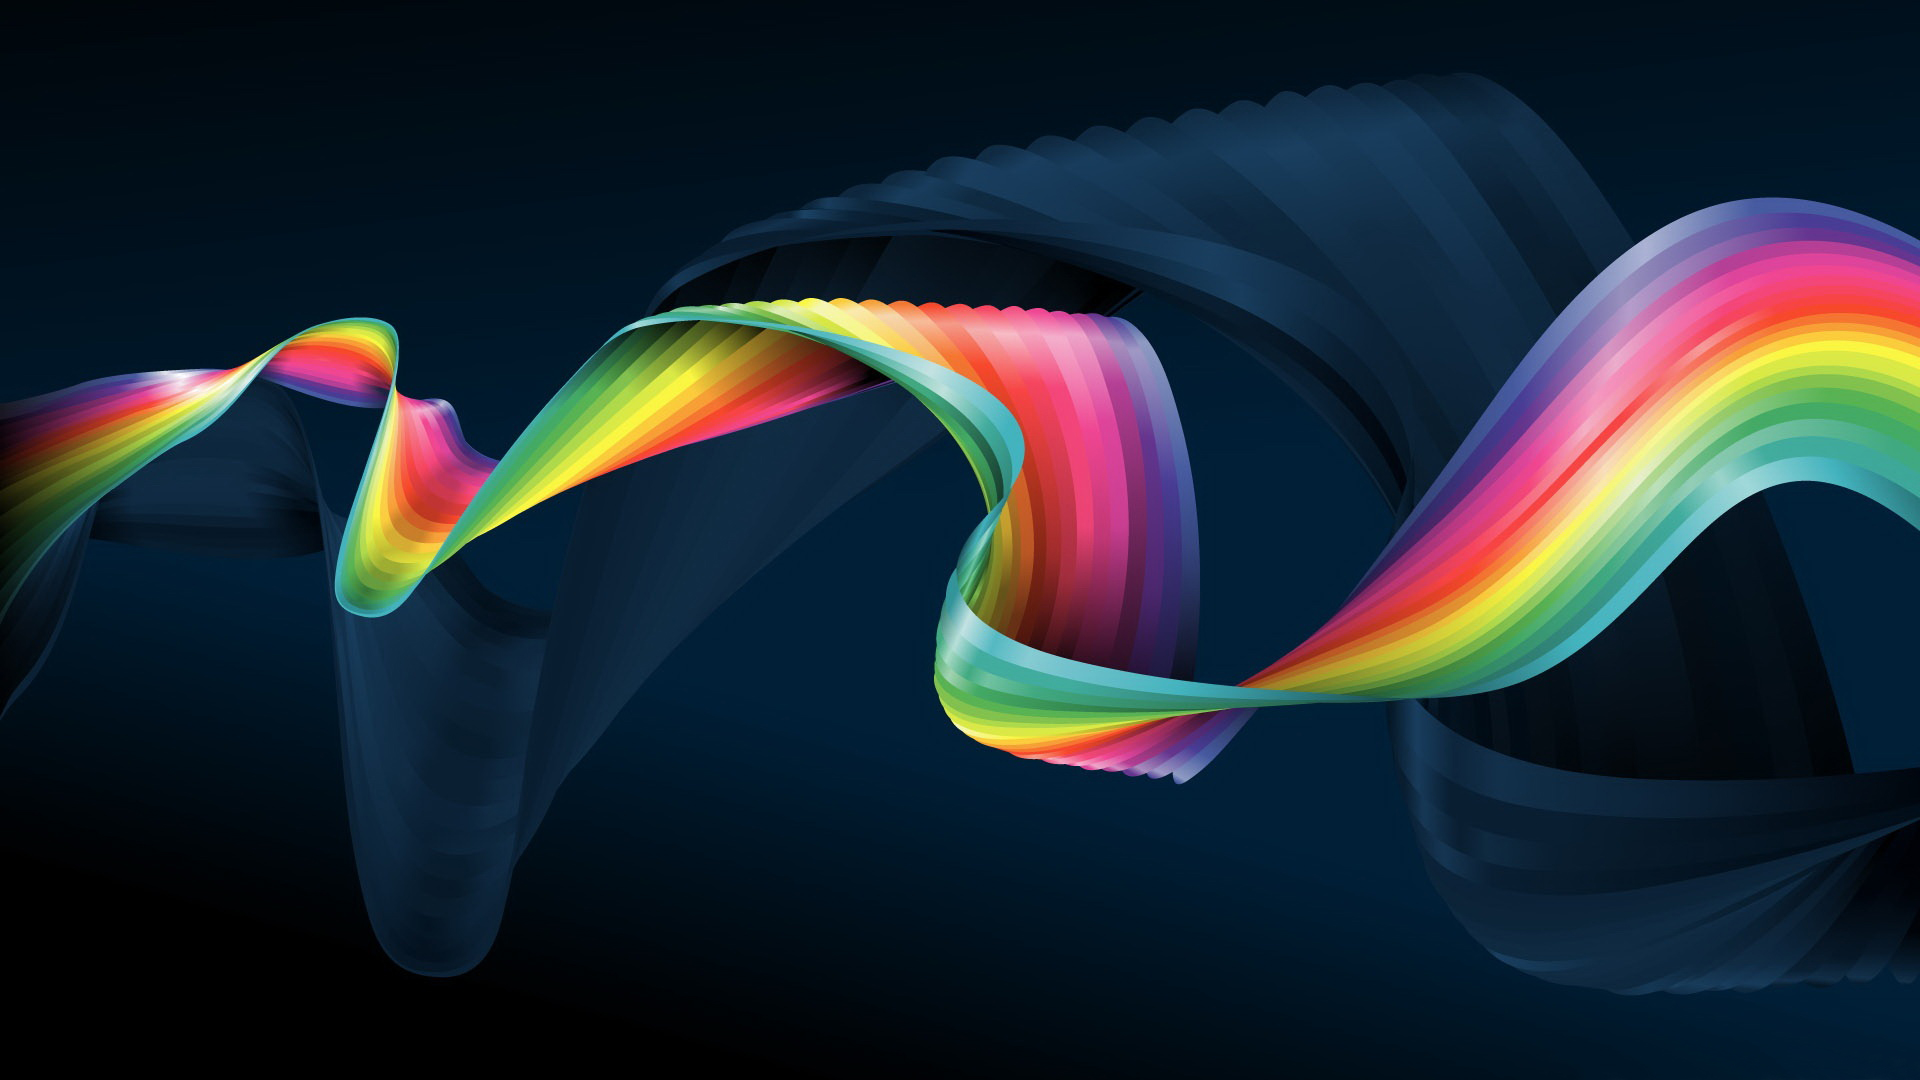 Rainbow Colors Abstract 1920x1080p Wallpaper | Daily Pics Update ...